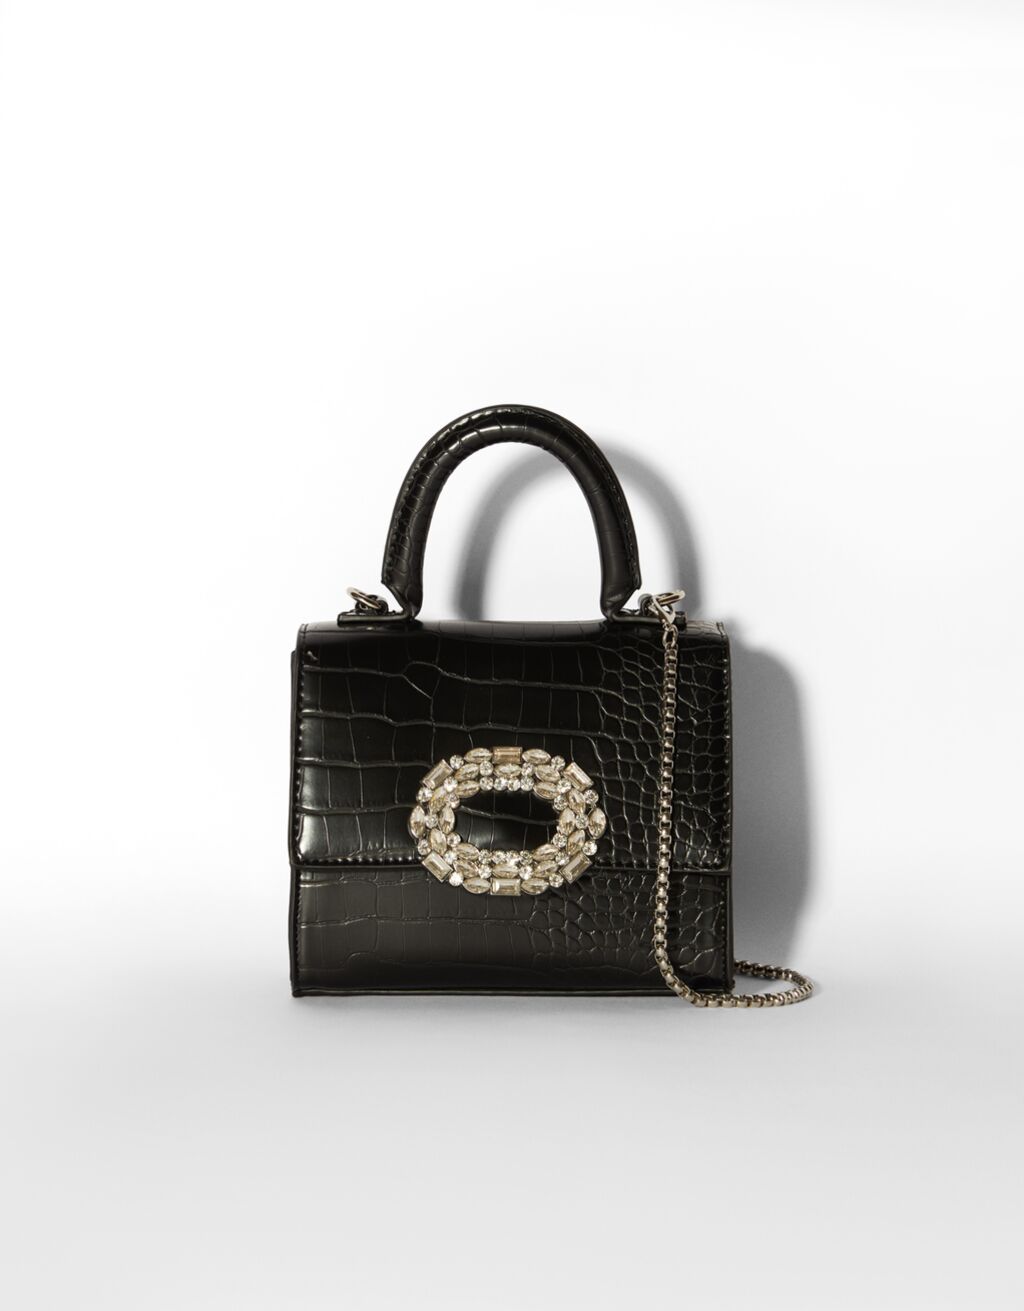 Mock croc bag with chain strap